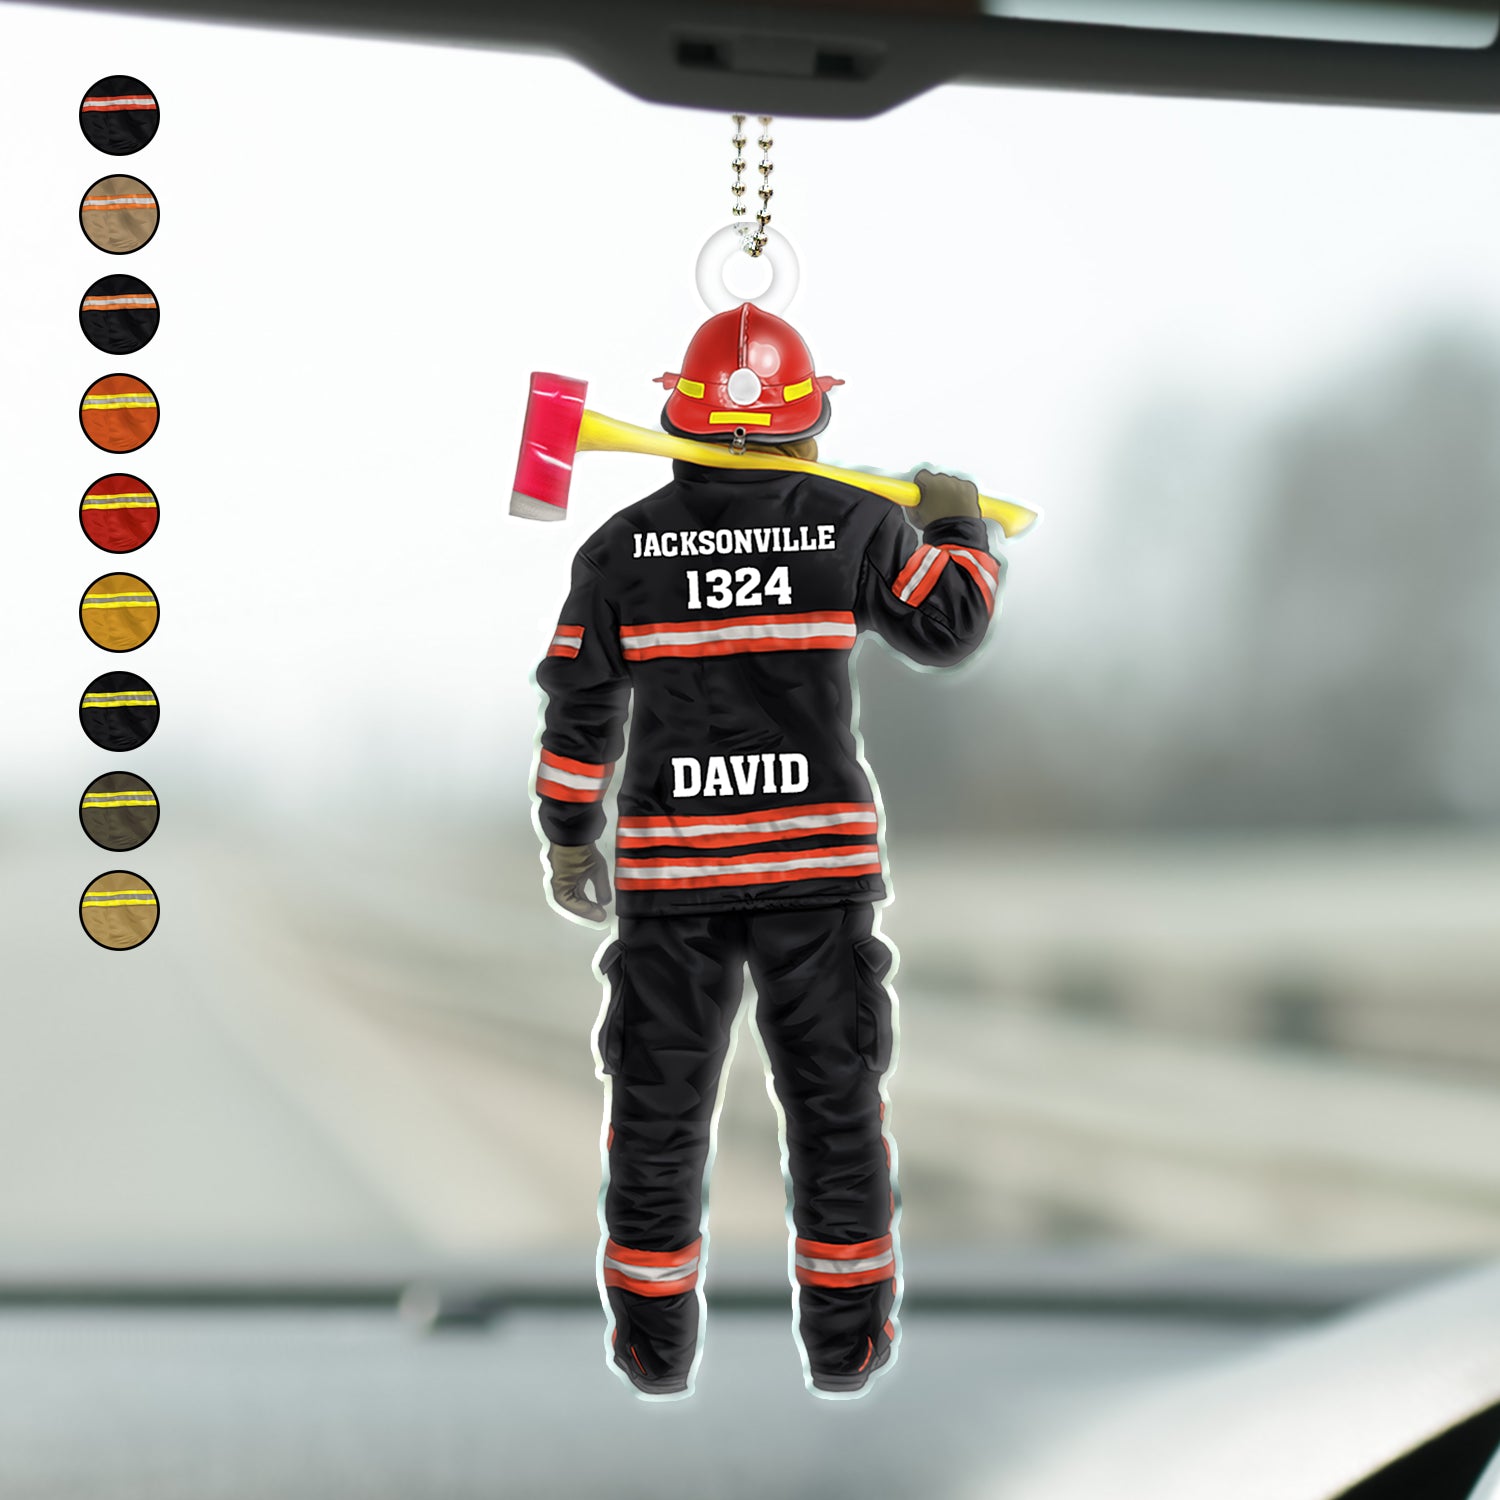 Firefighter Uniform - Gift For Firefighters - Personalized Acrylic Car Hanger